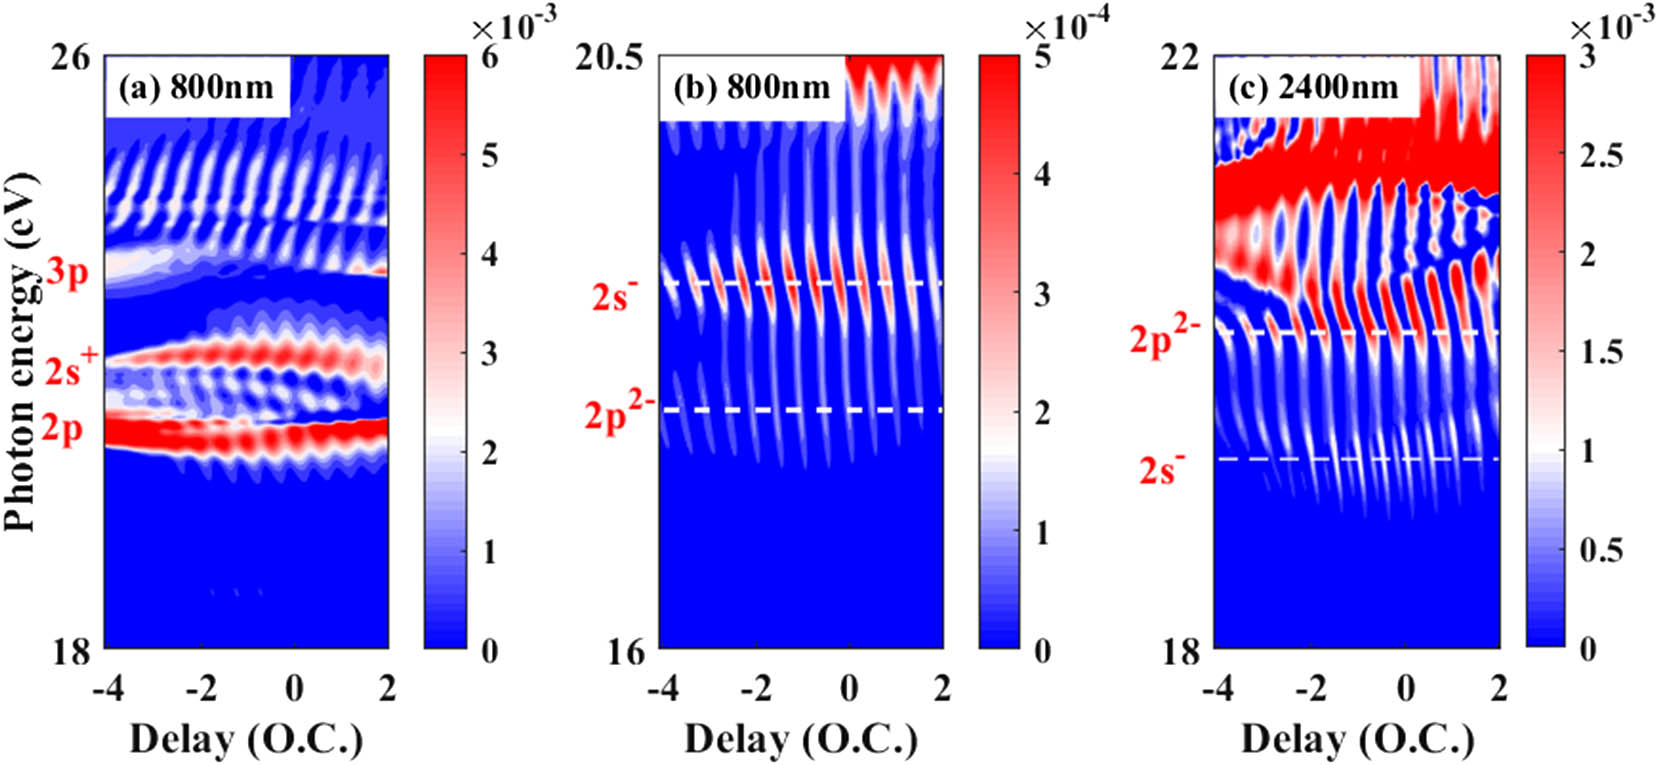 ATAS calculated for (a) 800 nm and (c) 2400 nm laser pulses with 3D-TDSE. For better observation, the region in (a) with the photon energy ranging from 16 to 20.5 eV is enlarged in (b). In (b) and (c), the absorption signals for 2s− and 2p2− are marked by white-dashed lines.